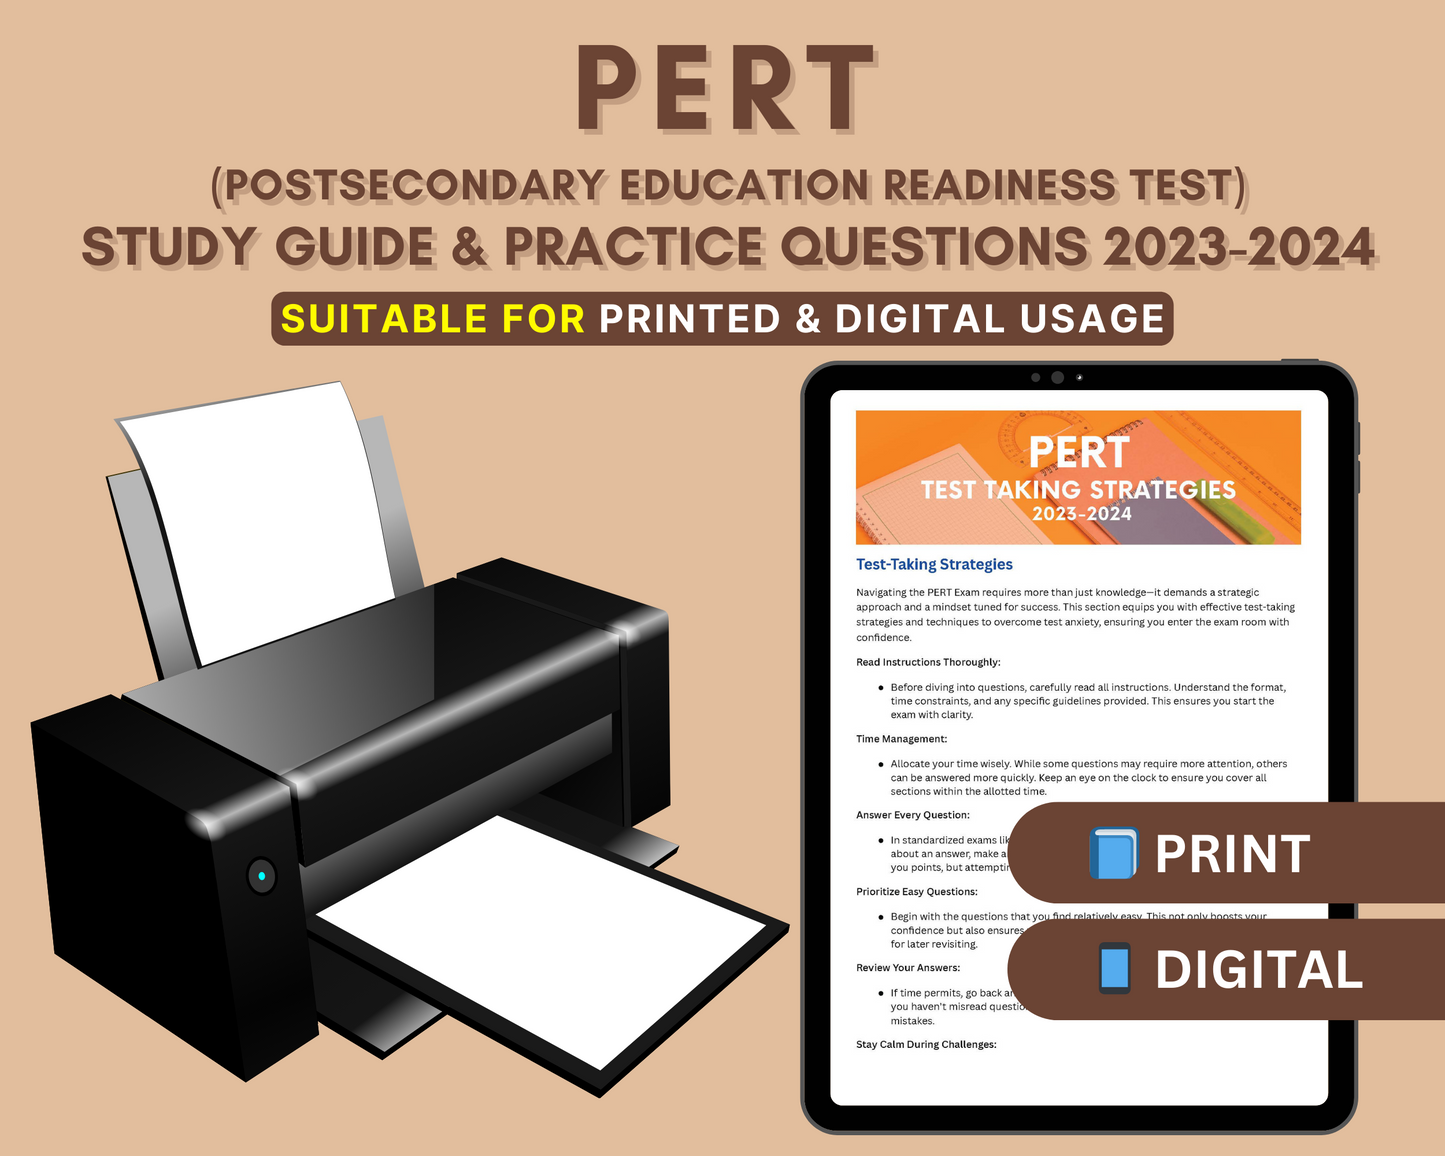 PERT Exam Study Guide 2023-2024: In-Depth Content Review, Practice Tests & Exam Strategies for College Readiness